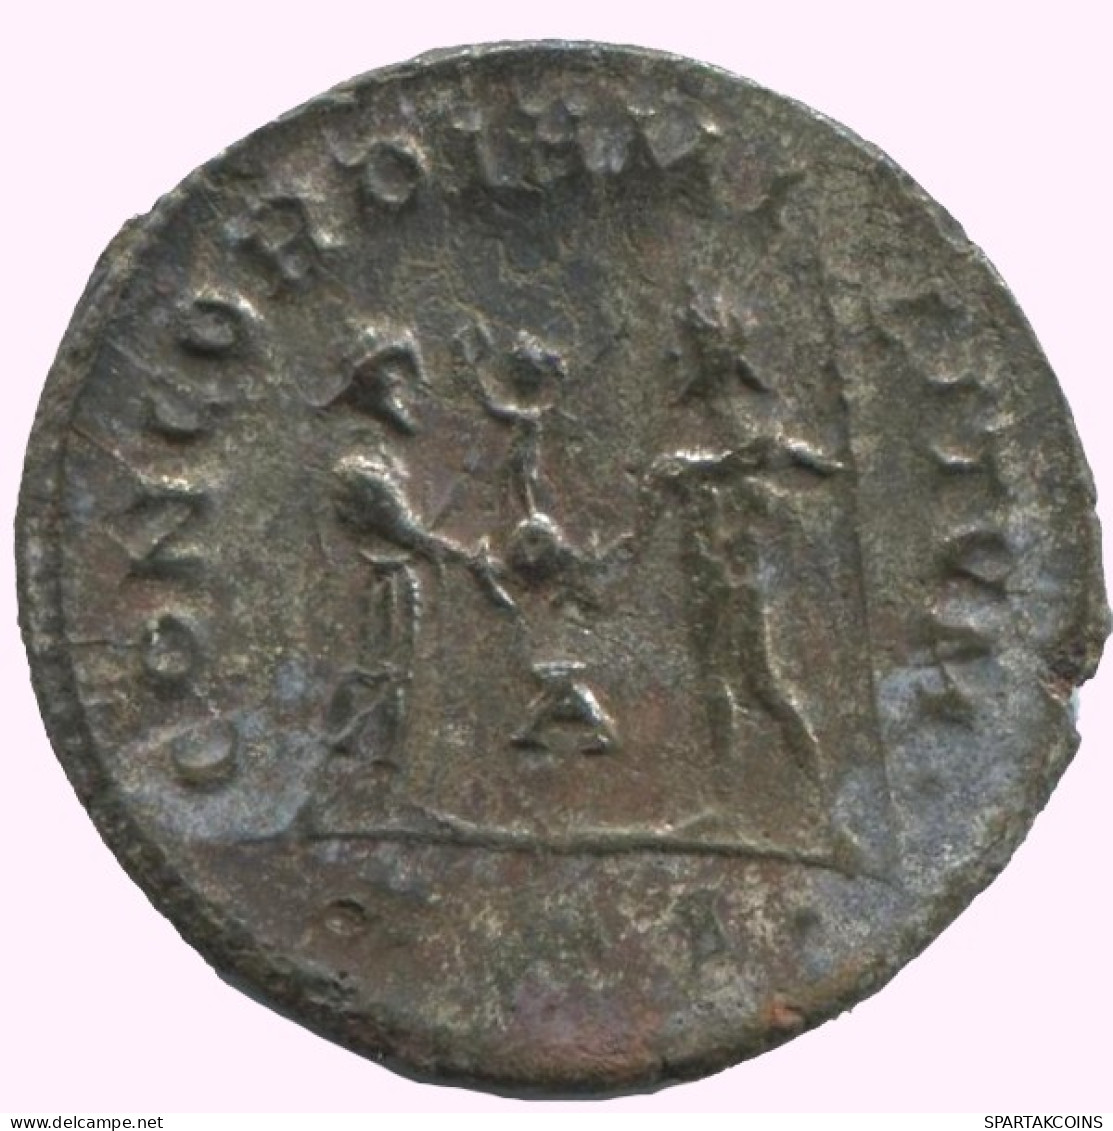 DIOCLETIAN ANTONINIANUS Antioch (A) AD 295-297 CONCORDIA MILITVM #ANT1947.48.U.A - The Tetrarchy (284 AD Tot 307 AD)